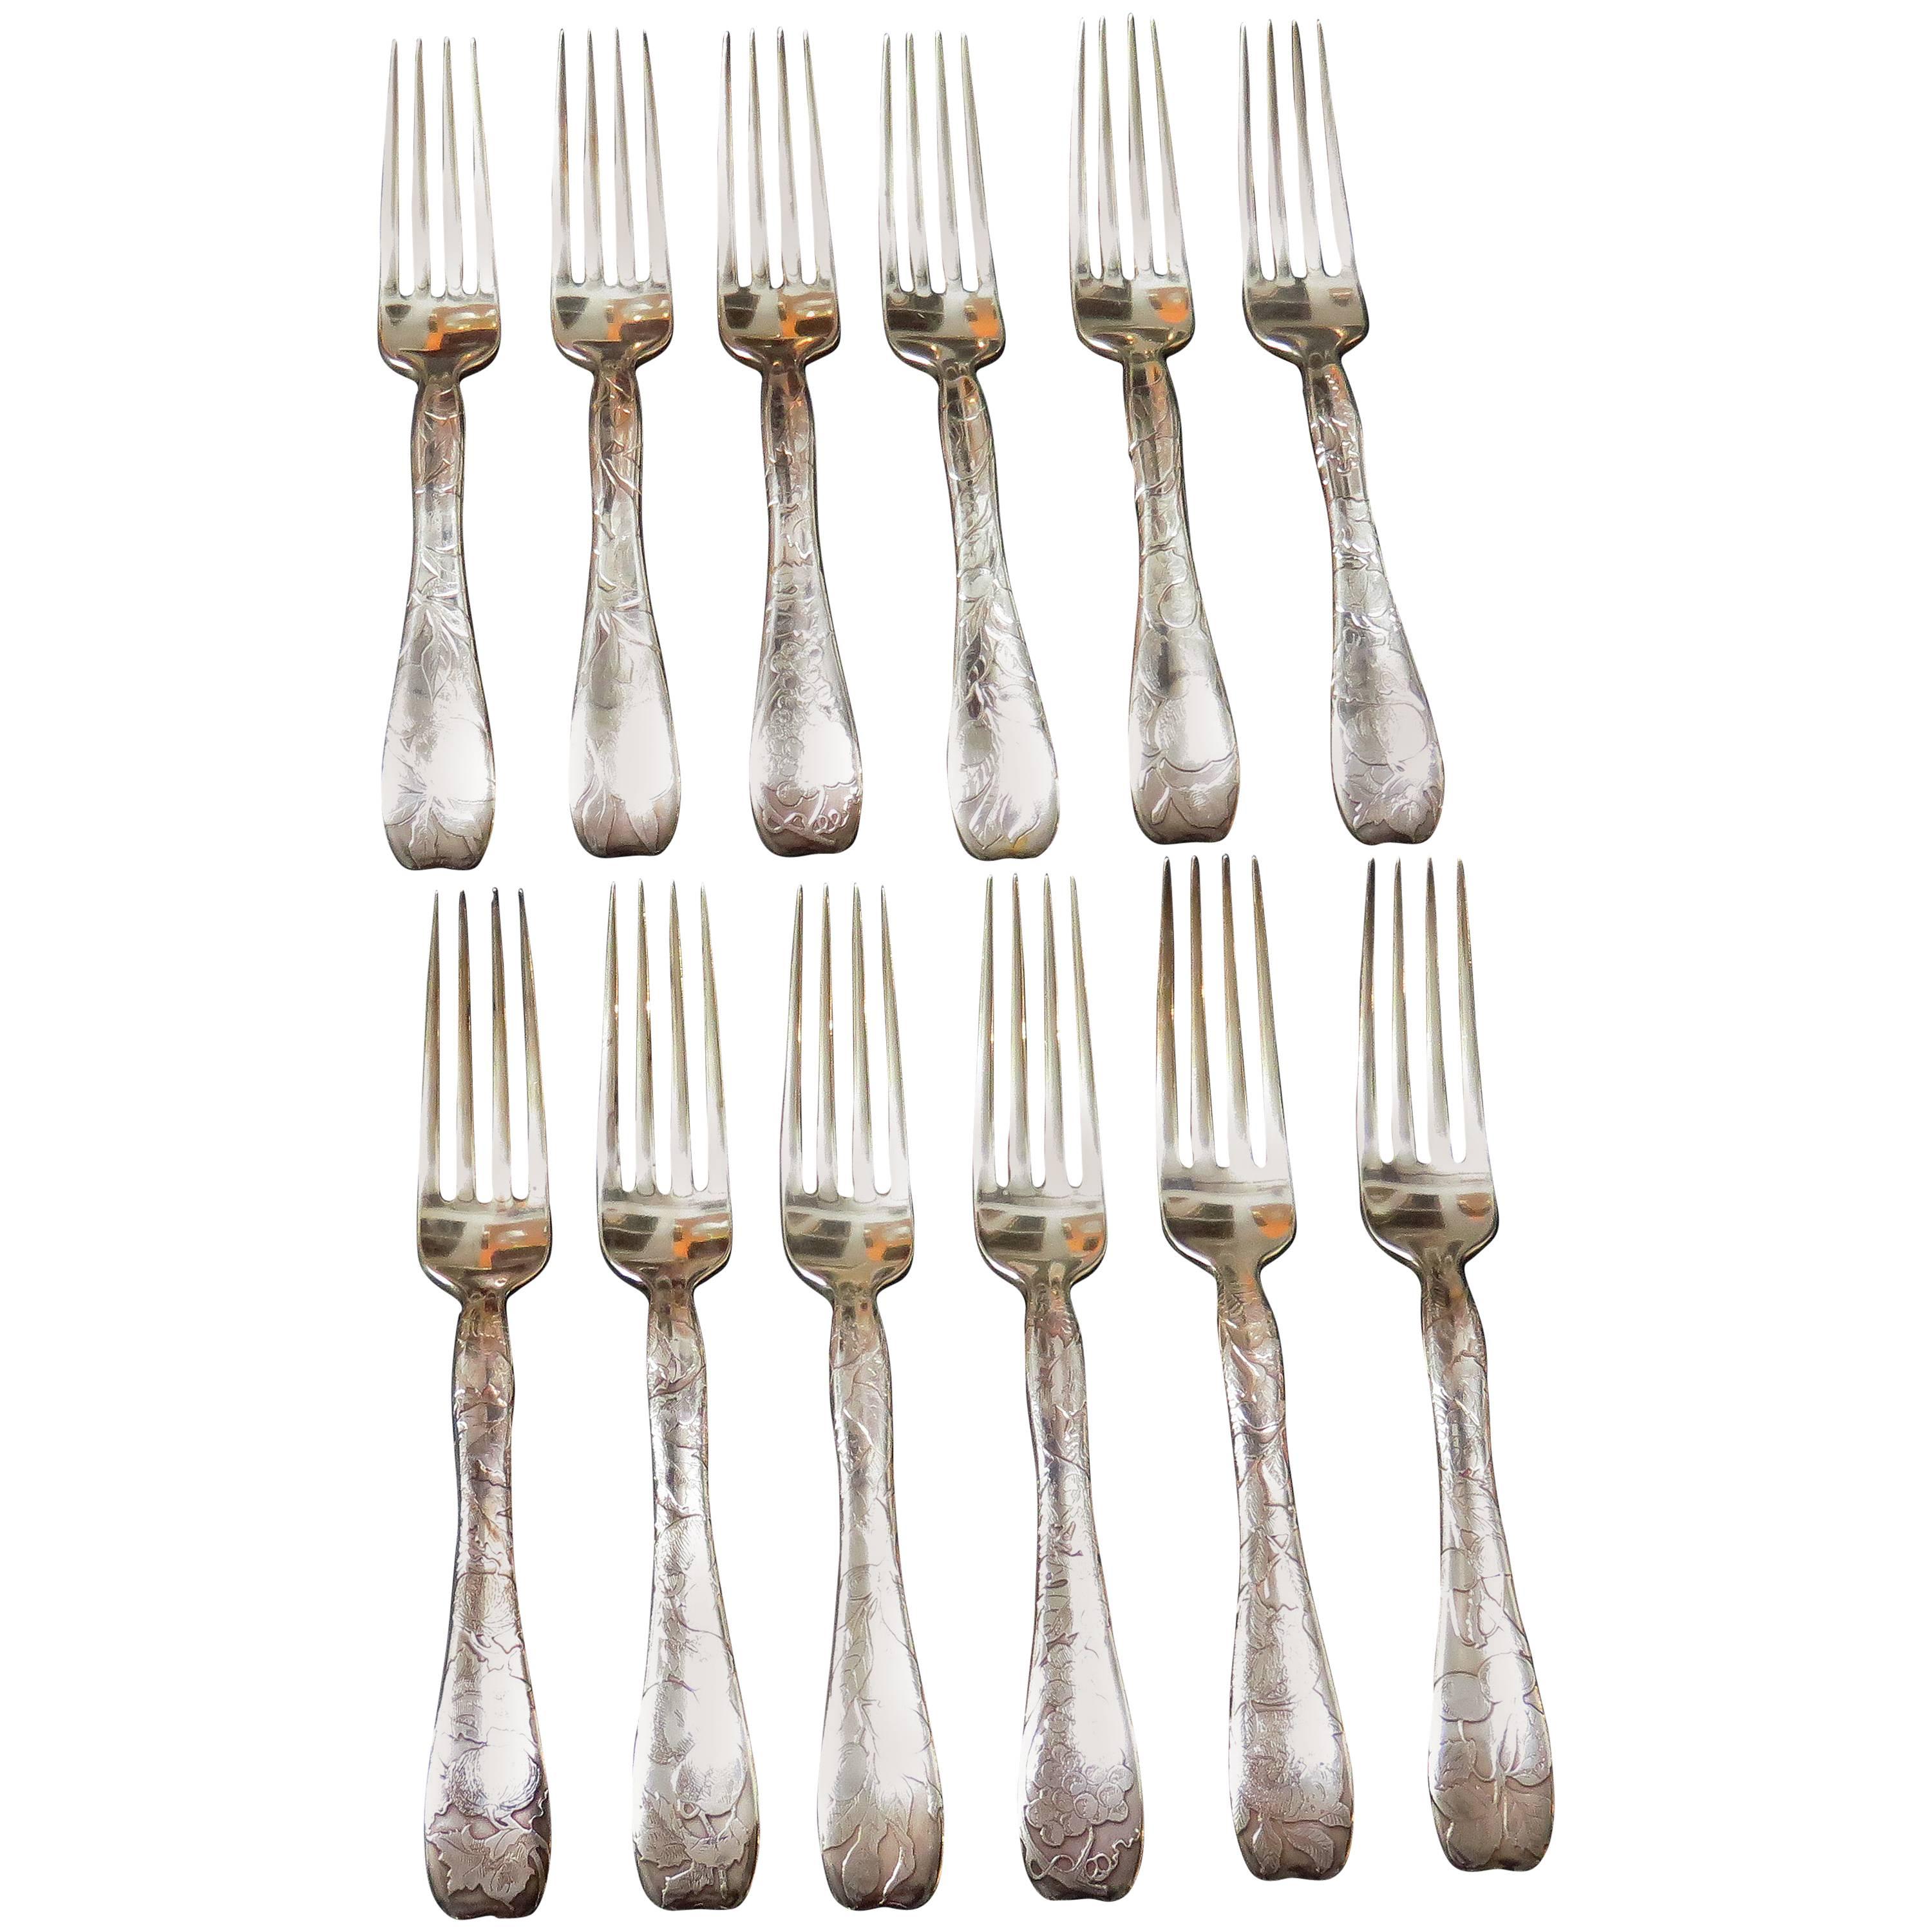 Tiffany & Co. Lap over Edge Acid Etched Lunch Forks, circa 1880 For Sale